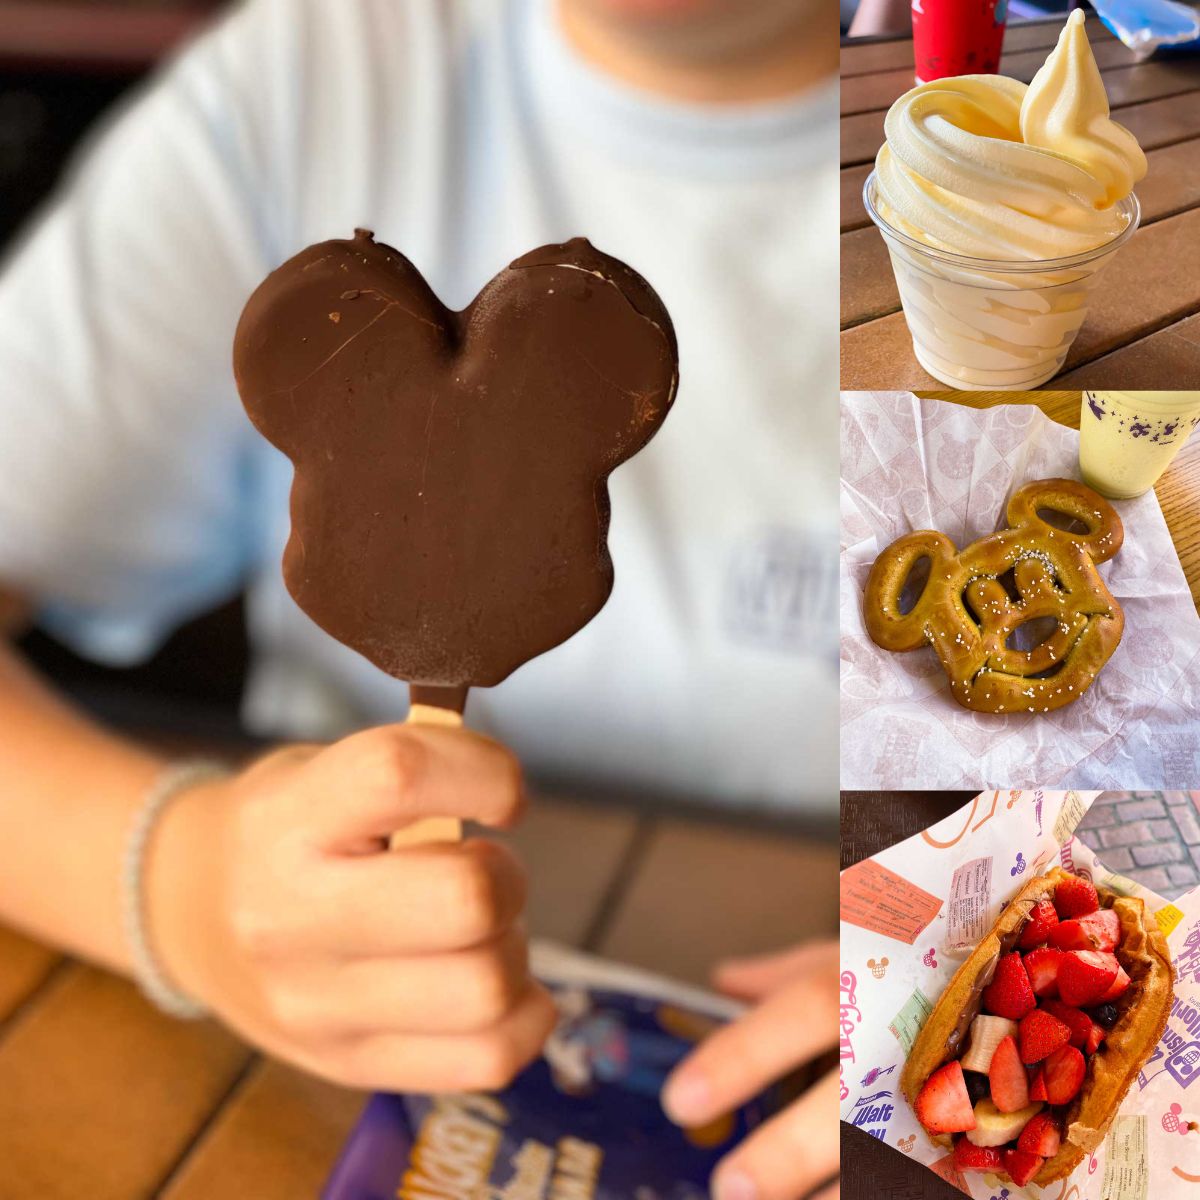 A collage shows 4 of the best Disney treats to eat.